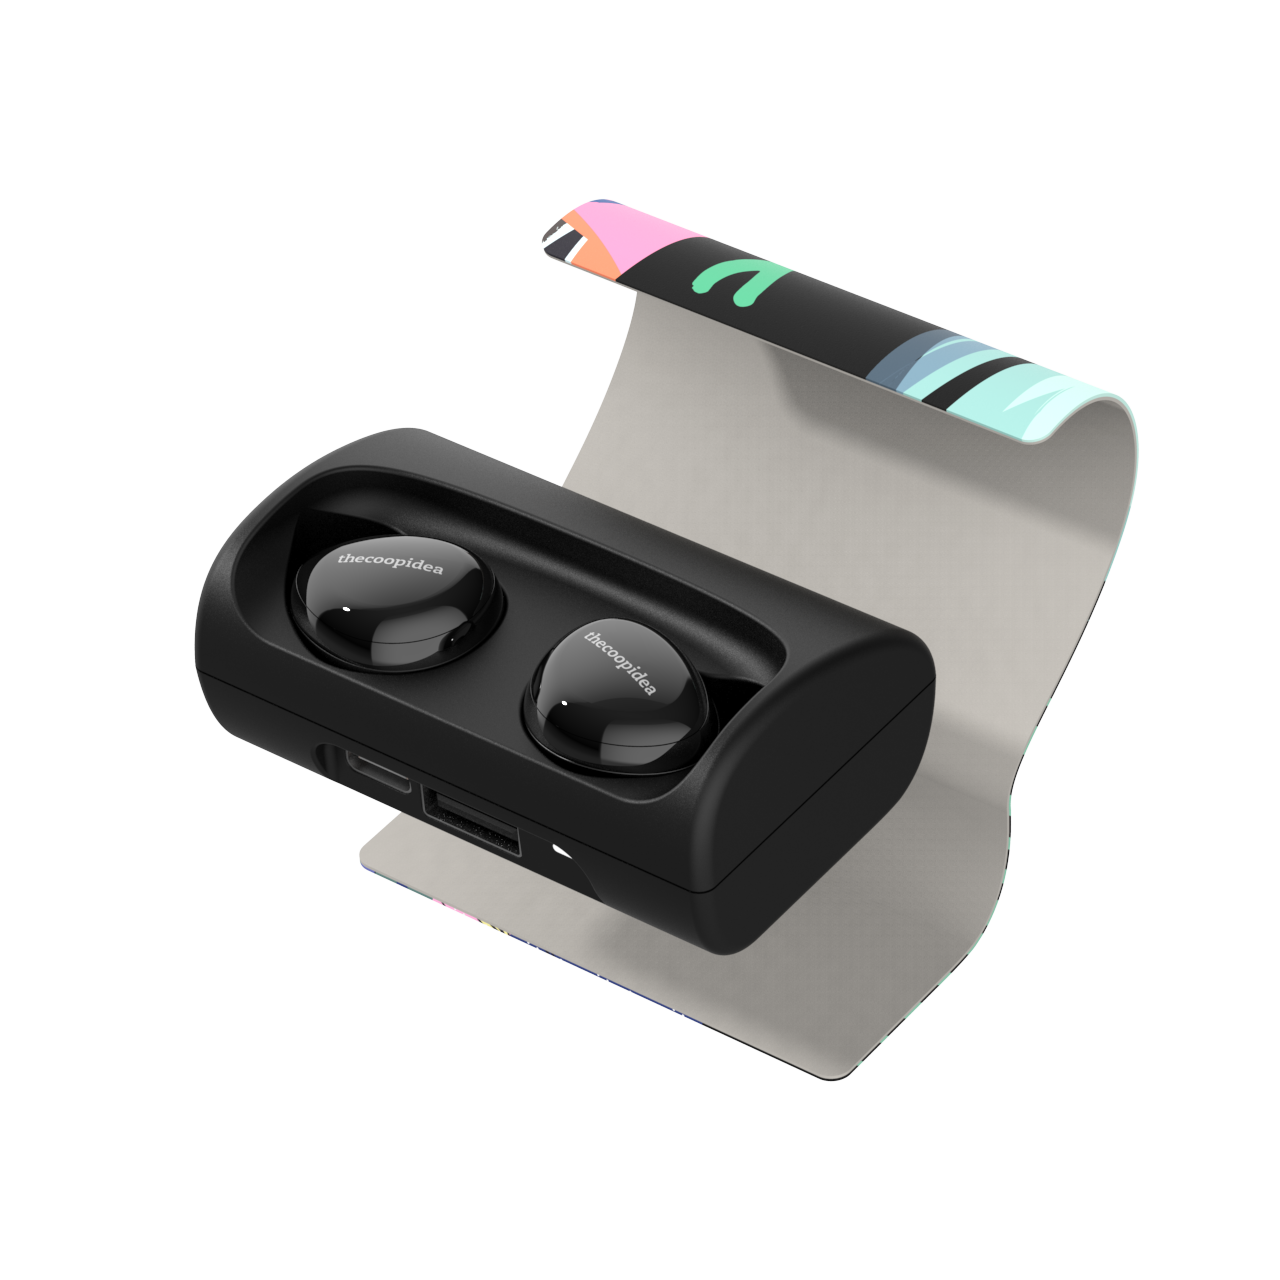 thecoopidea - BEANS+ True Wireless Earbuds - Black